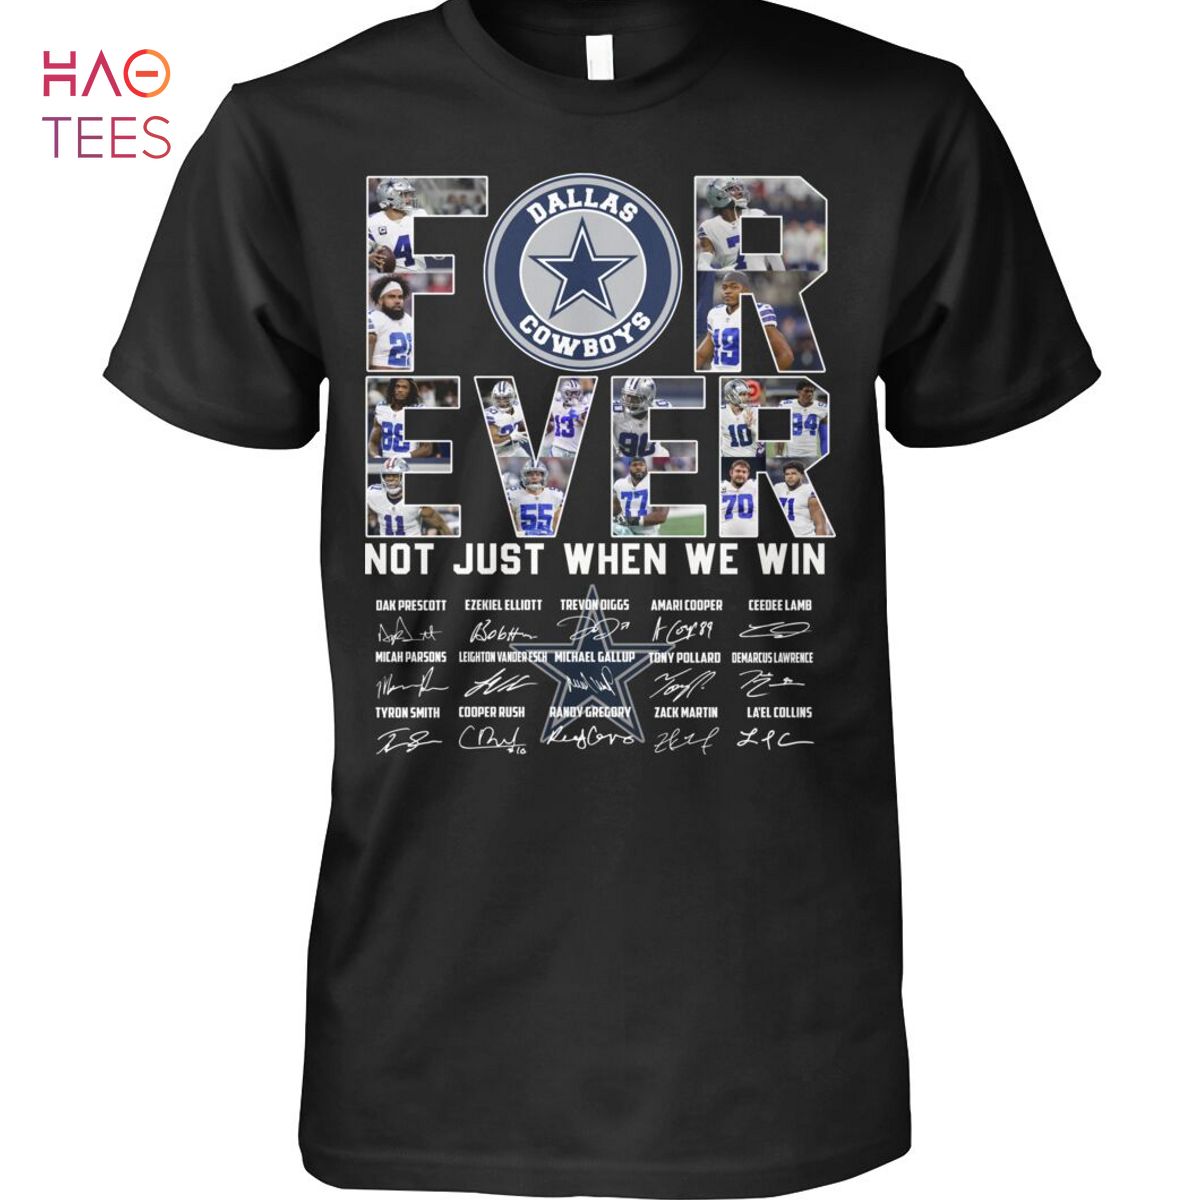 Dallas Cowboys Forever Shirt Limited Edition